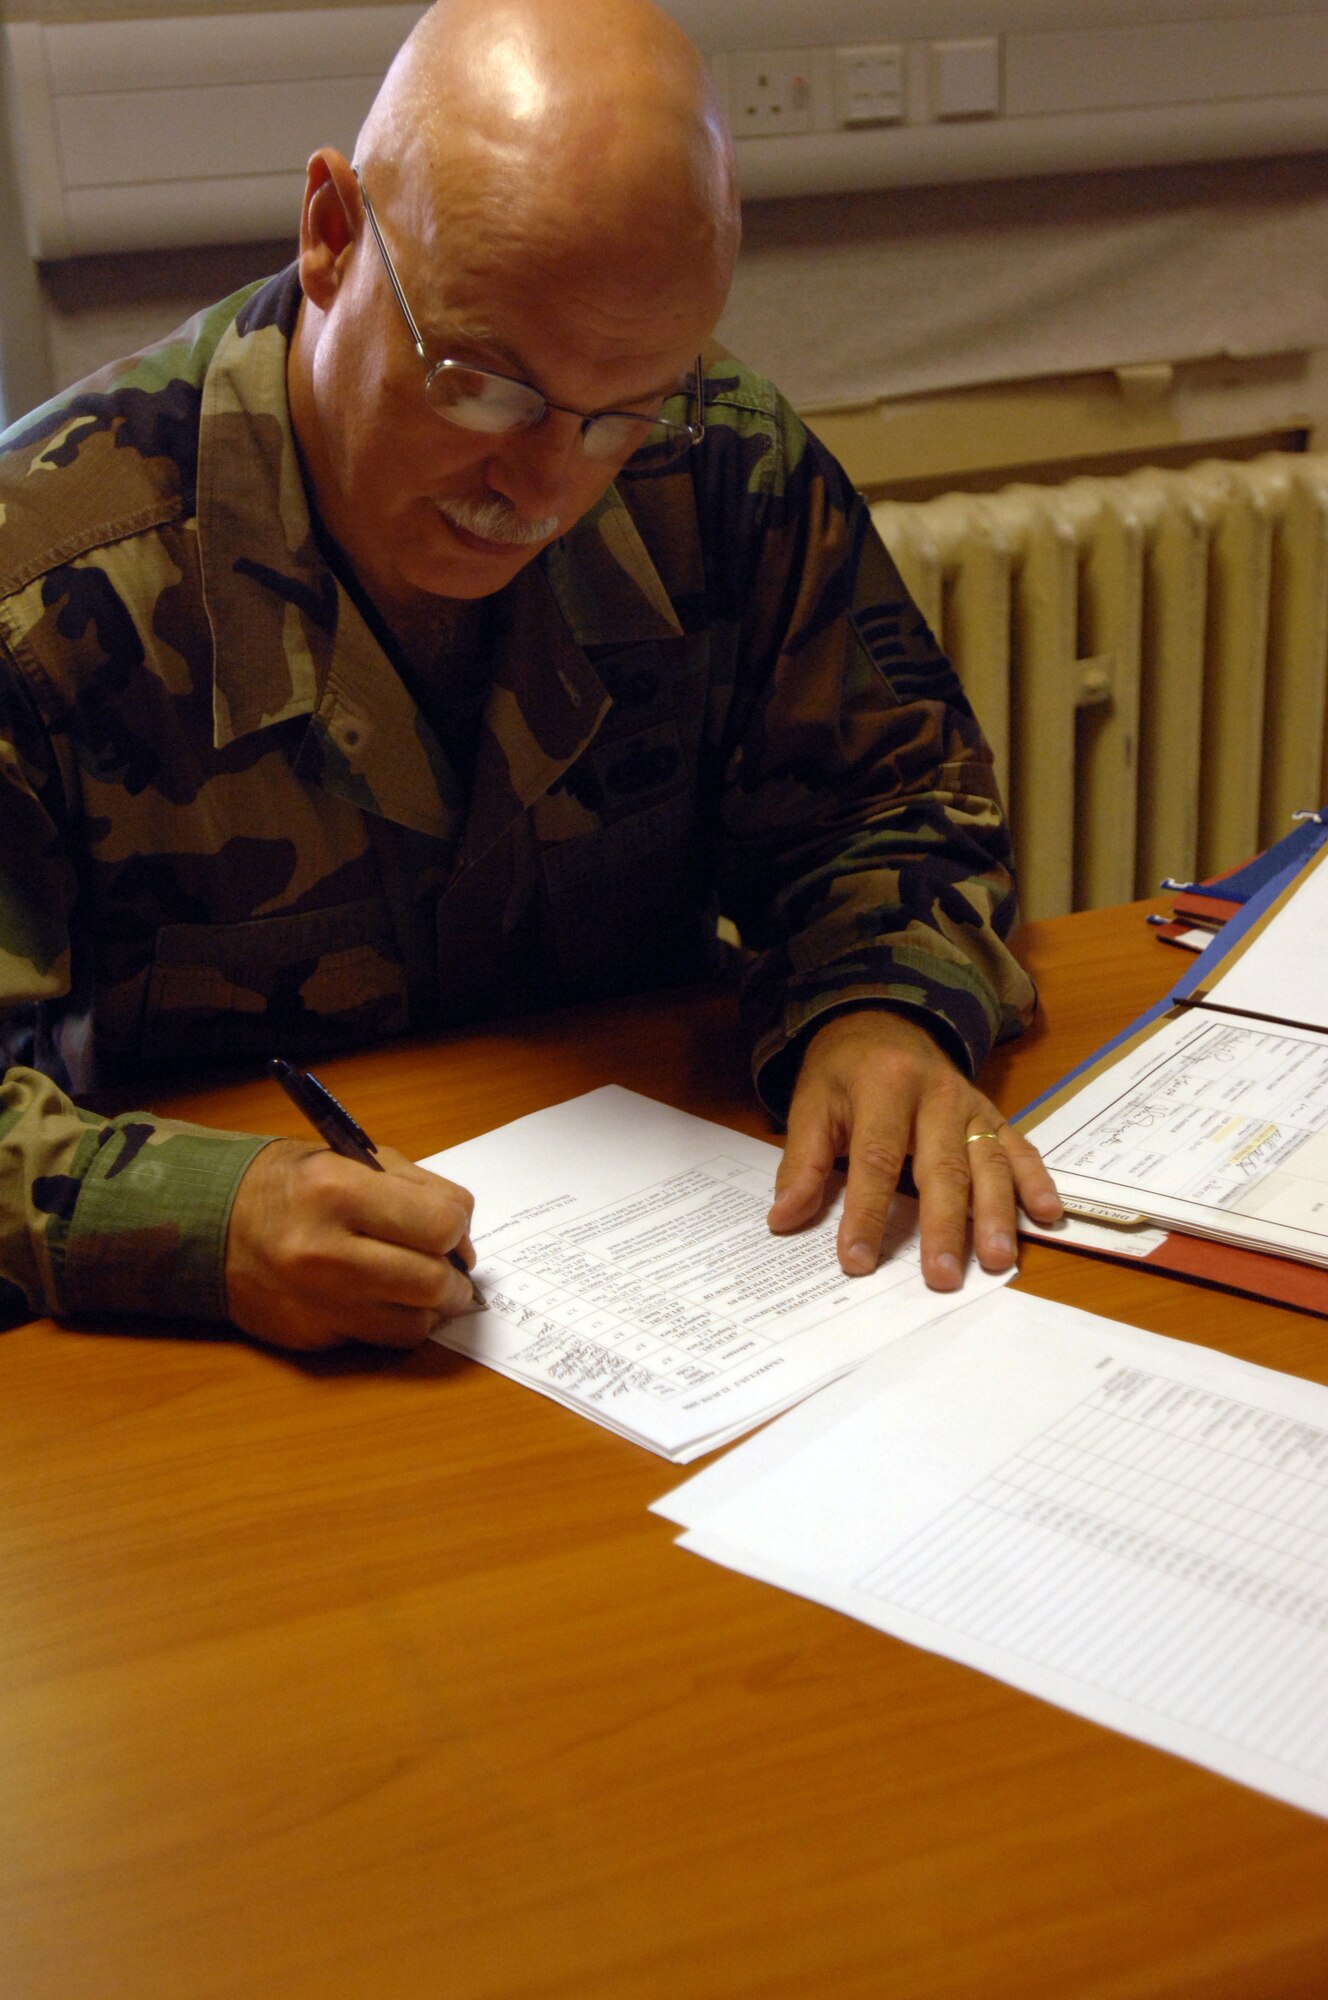 Master Sgt. Tim Stidhams, 446th Logistic Readiness Flight, McChord Air Force Base, Wash., reviews various support agreements while here on his 15-day tour July 25, 2008. (U.S. Air Force photo by Senior Airman Teresa M. Hawkins)